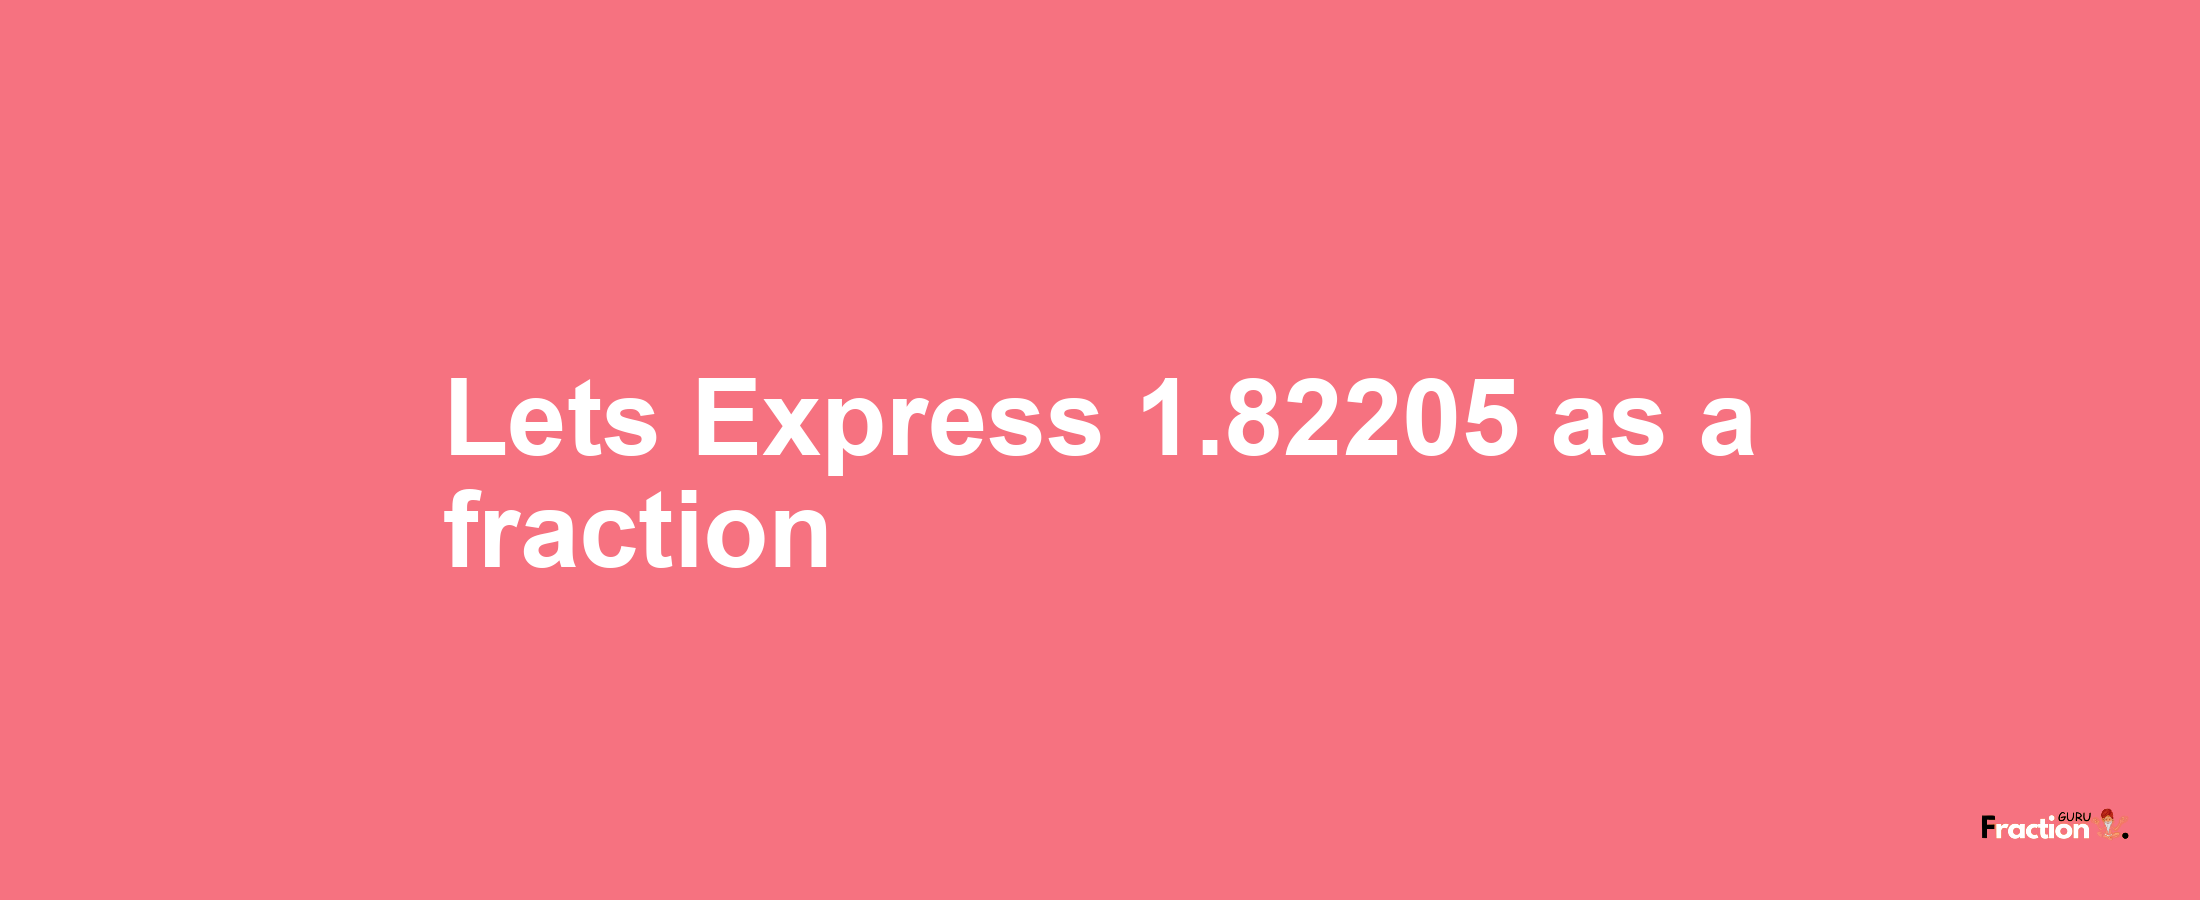 Lets Express 1.82205 as afraction